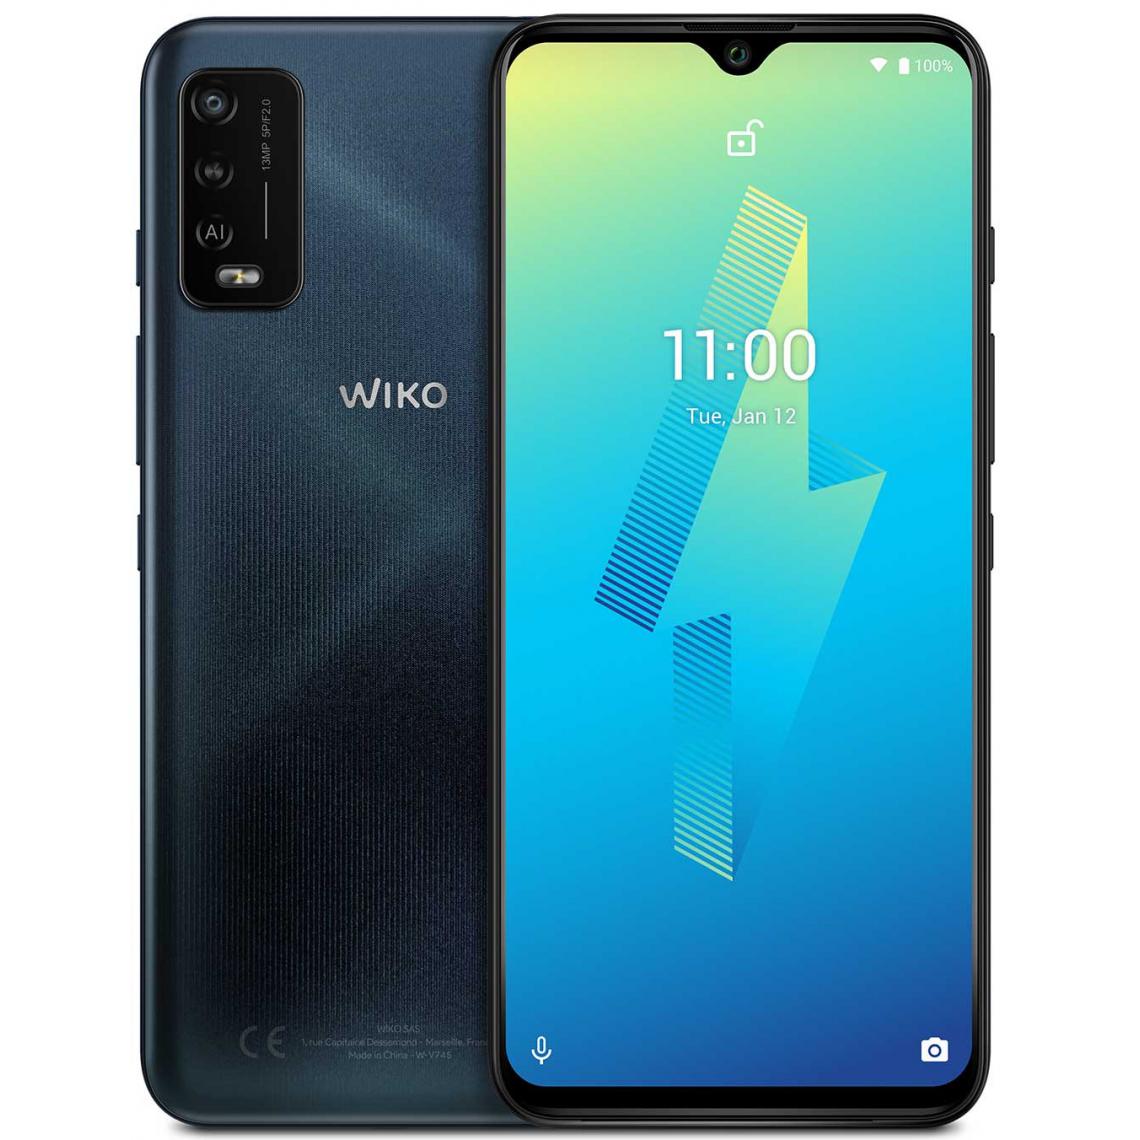 Wiko - WIKO Power U10 LS Carbone Blue 32Go - Smartphone Android